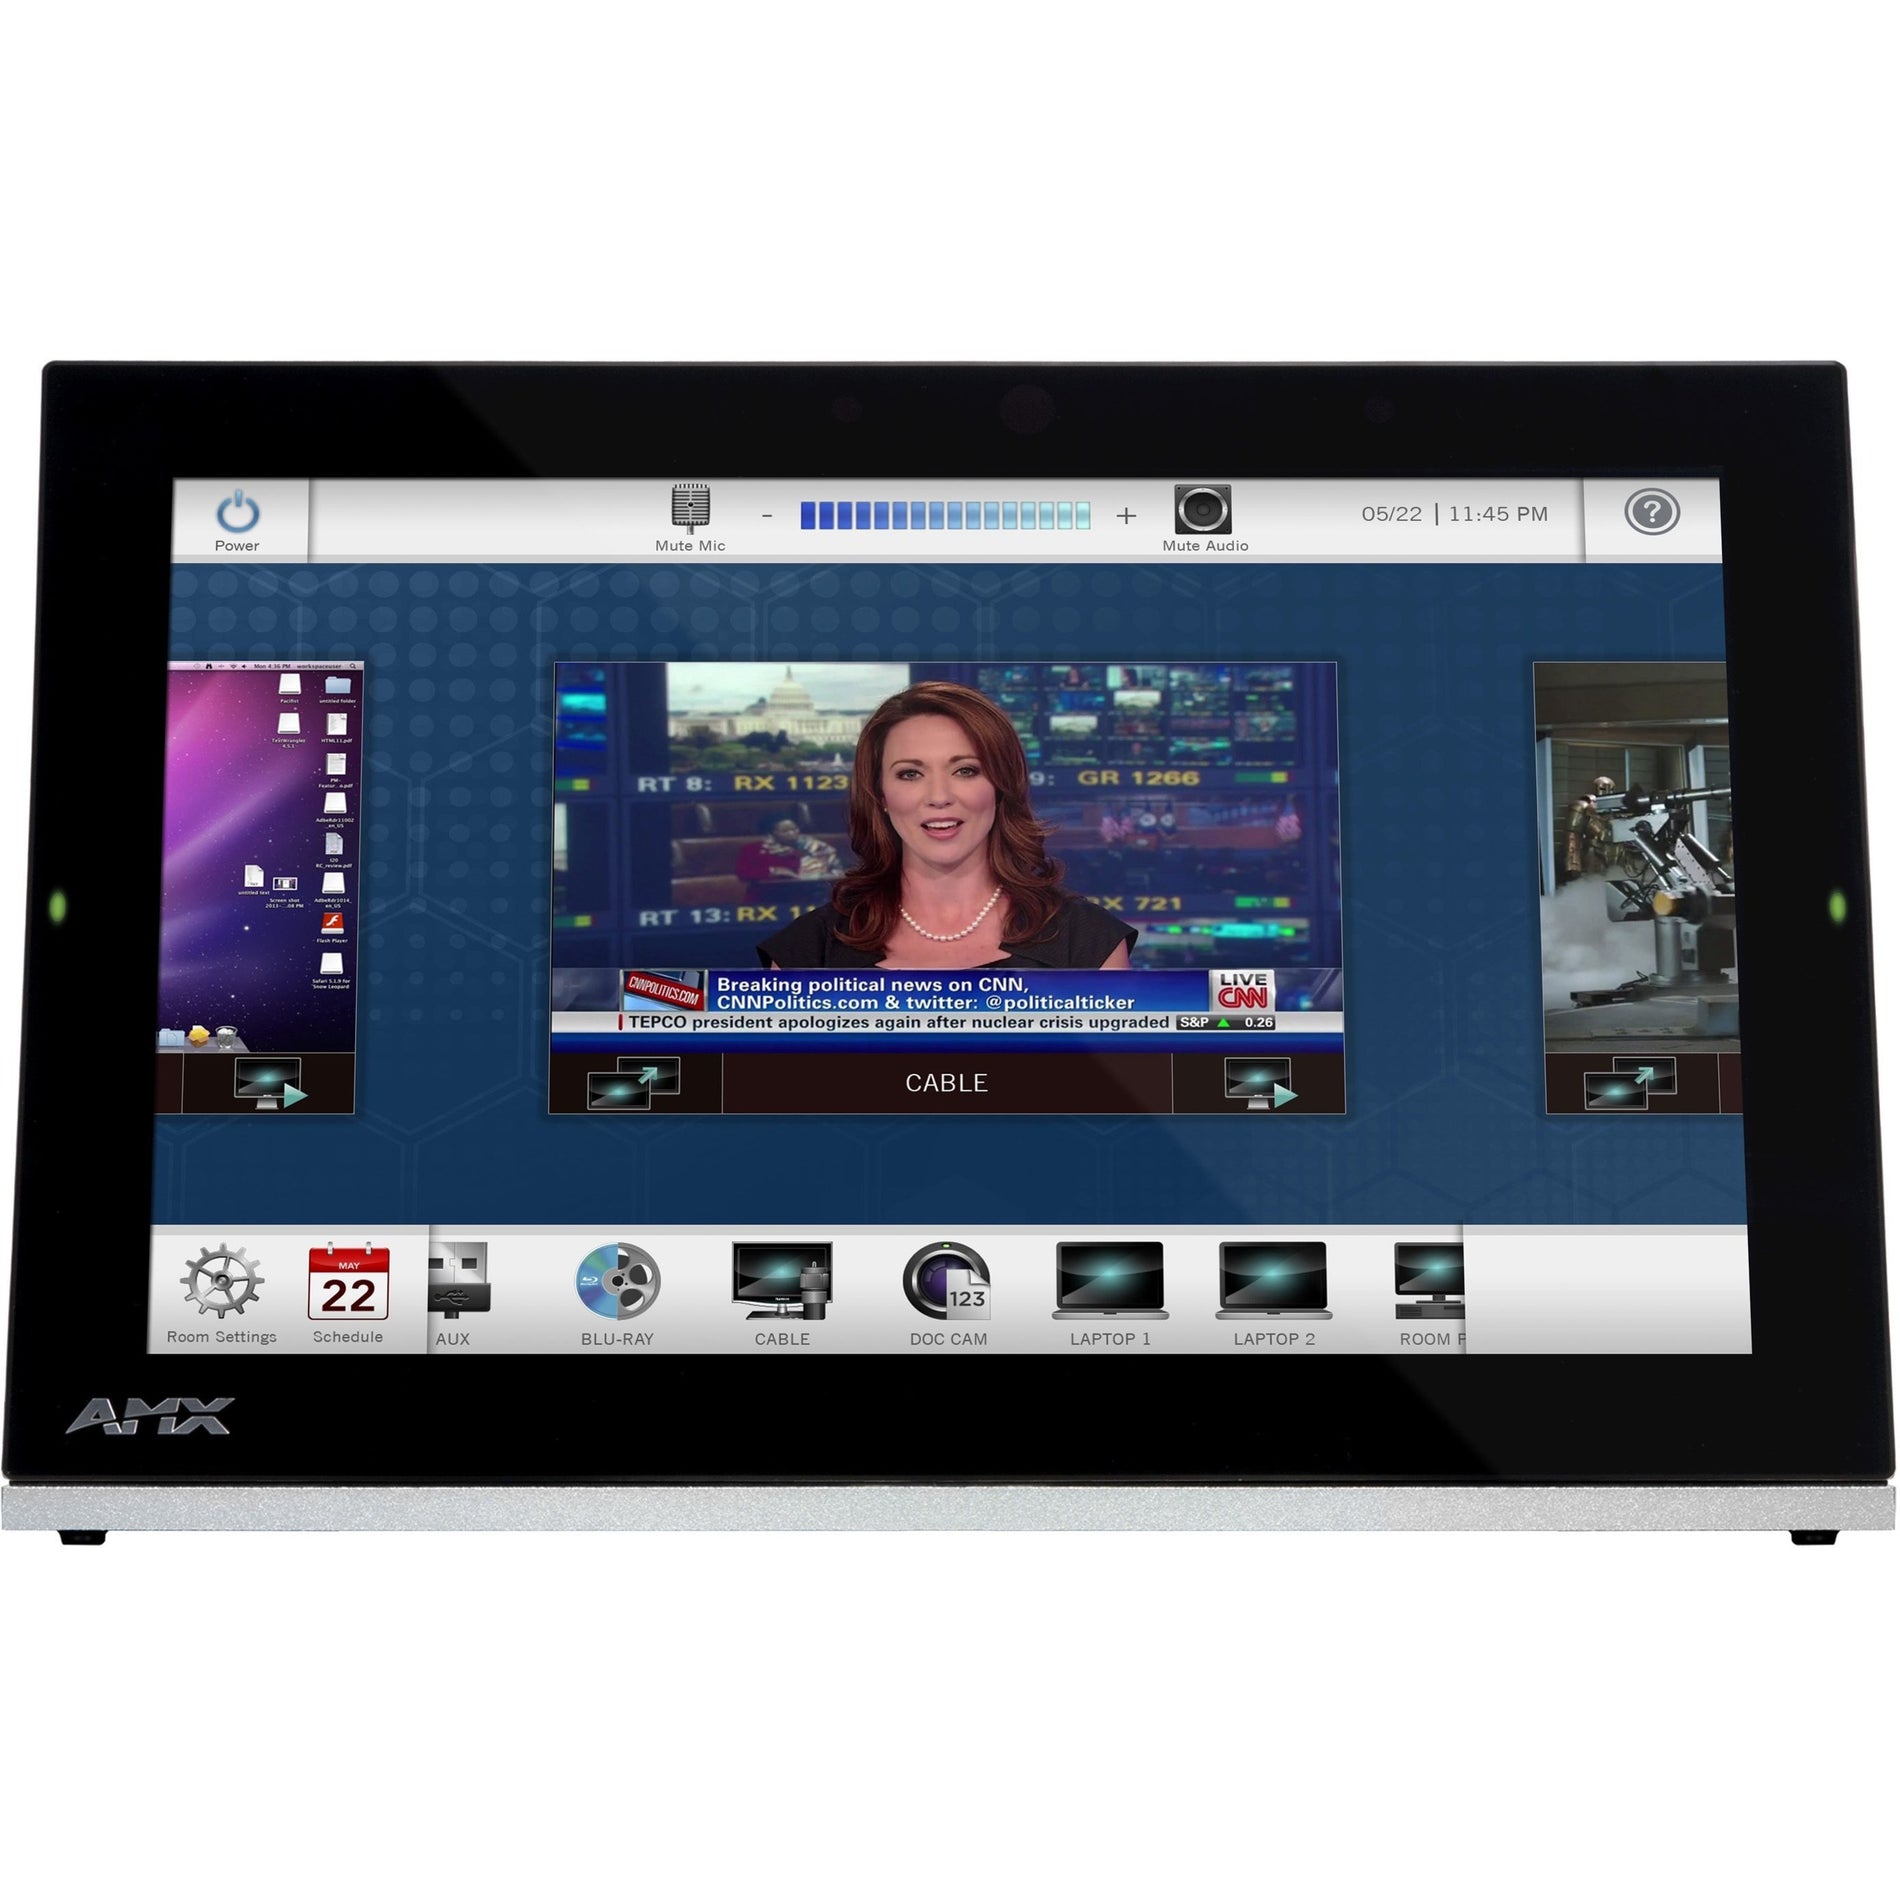 AMX FG5969-47 Modero G5 Tabletop Touch Panel - 10.1" Wired, Theater, Kitchen, Bedroom, Office